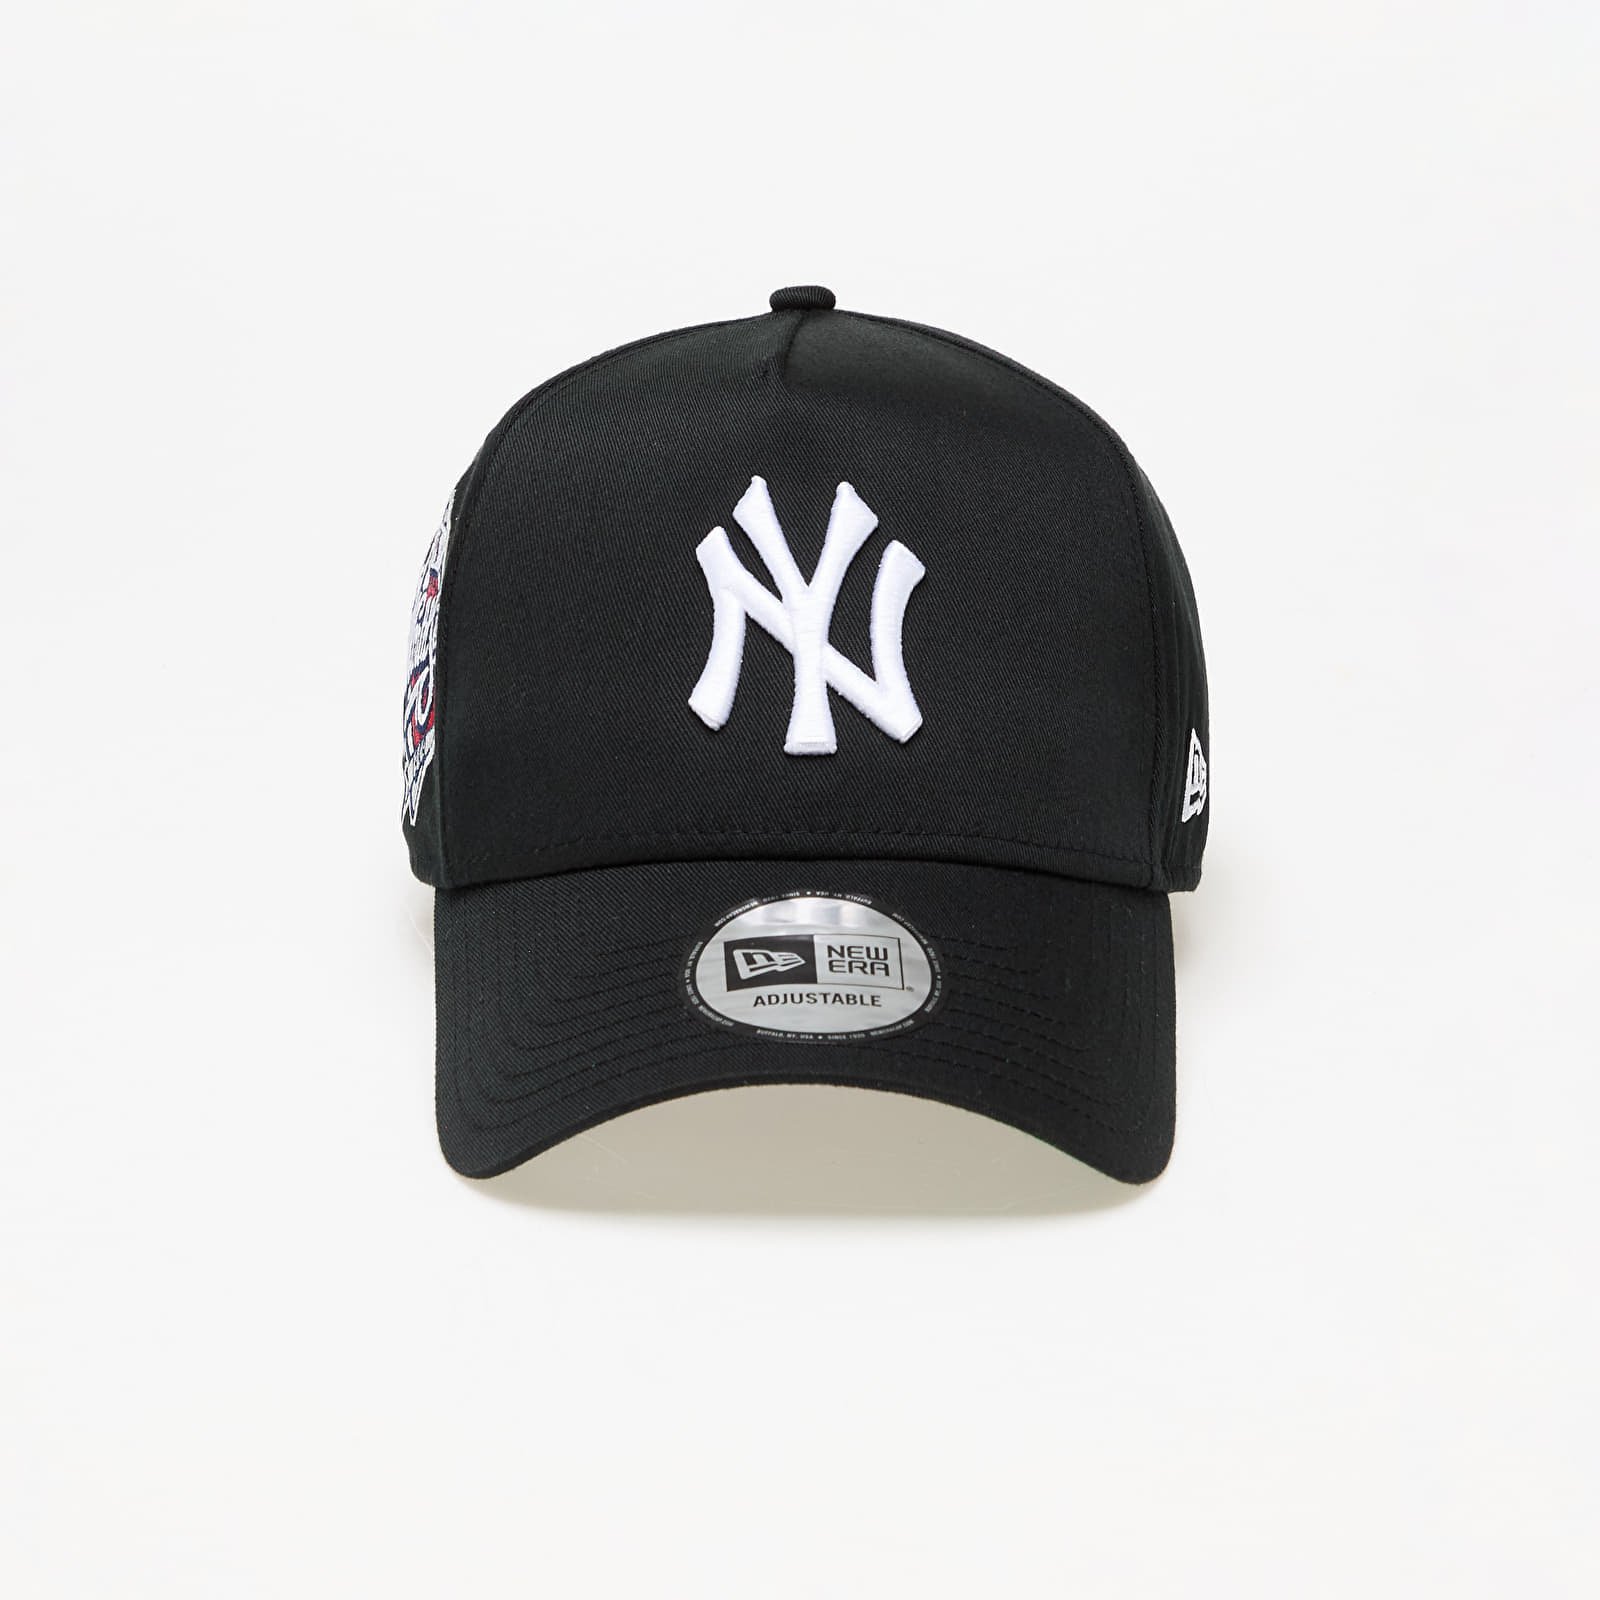 New York Yankees World Series Patch 9FORTY E-Frame Adjustable Cap